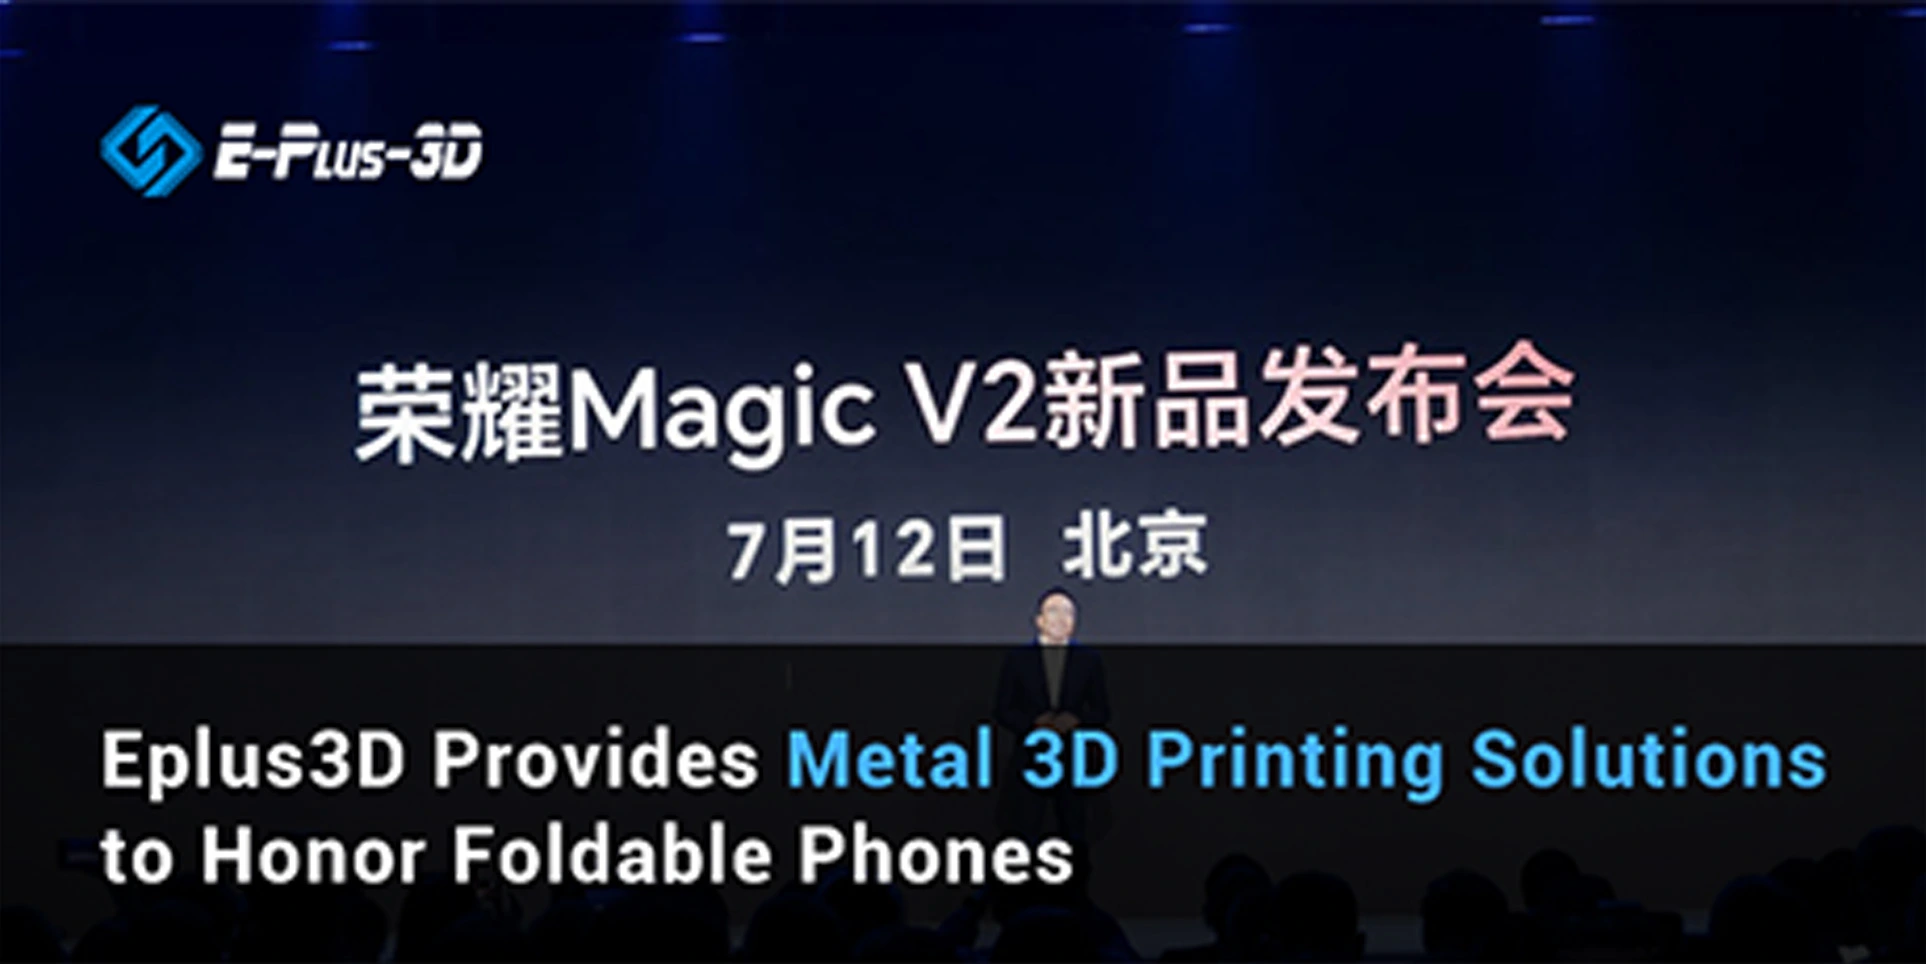 Eplus3D Provides Metal 3D Printing Solutions to Honor Foldable Phones